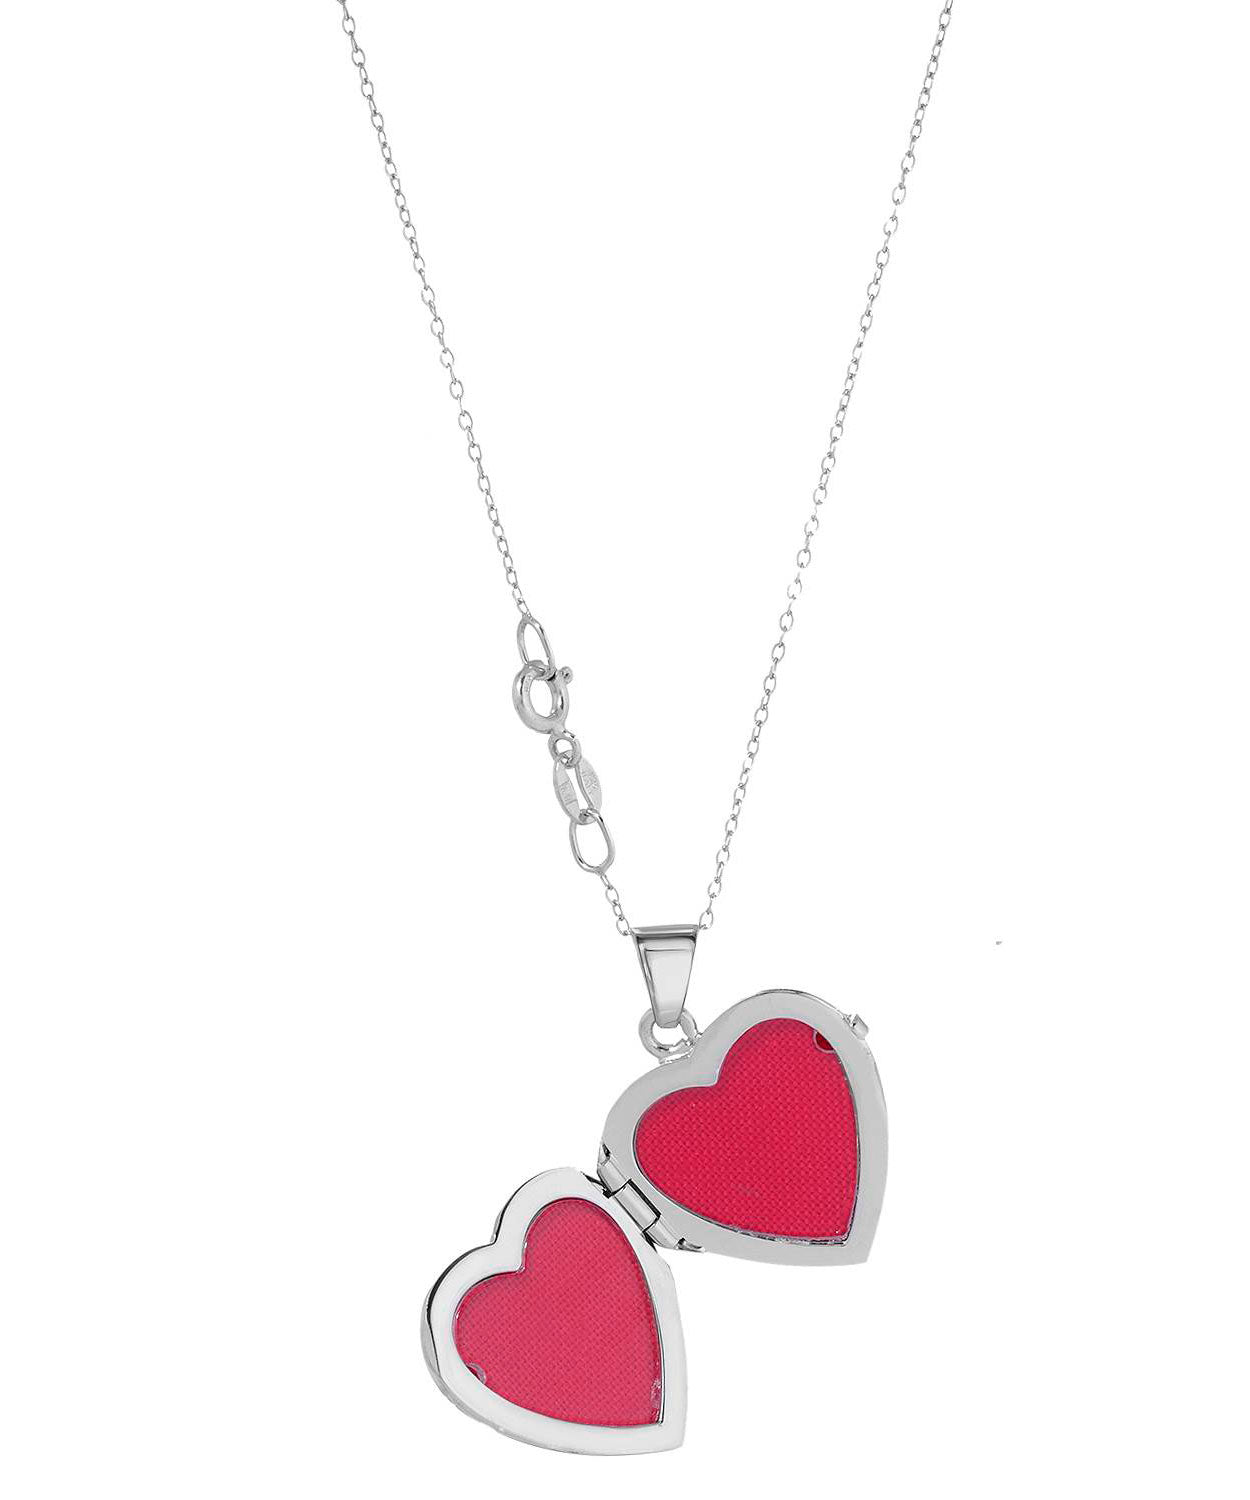 Rhodium Plated 925 Sterling Silver Heart Locket Pendant With Chain - Made in Italy View 2